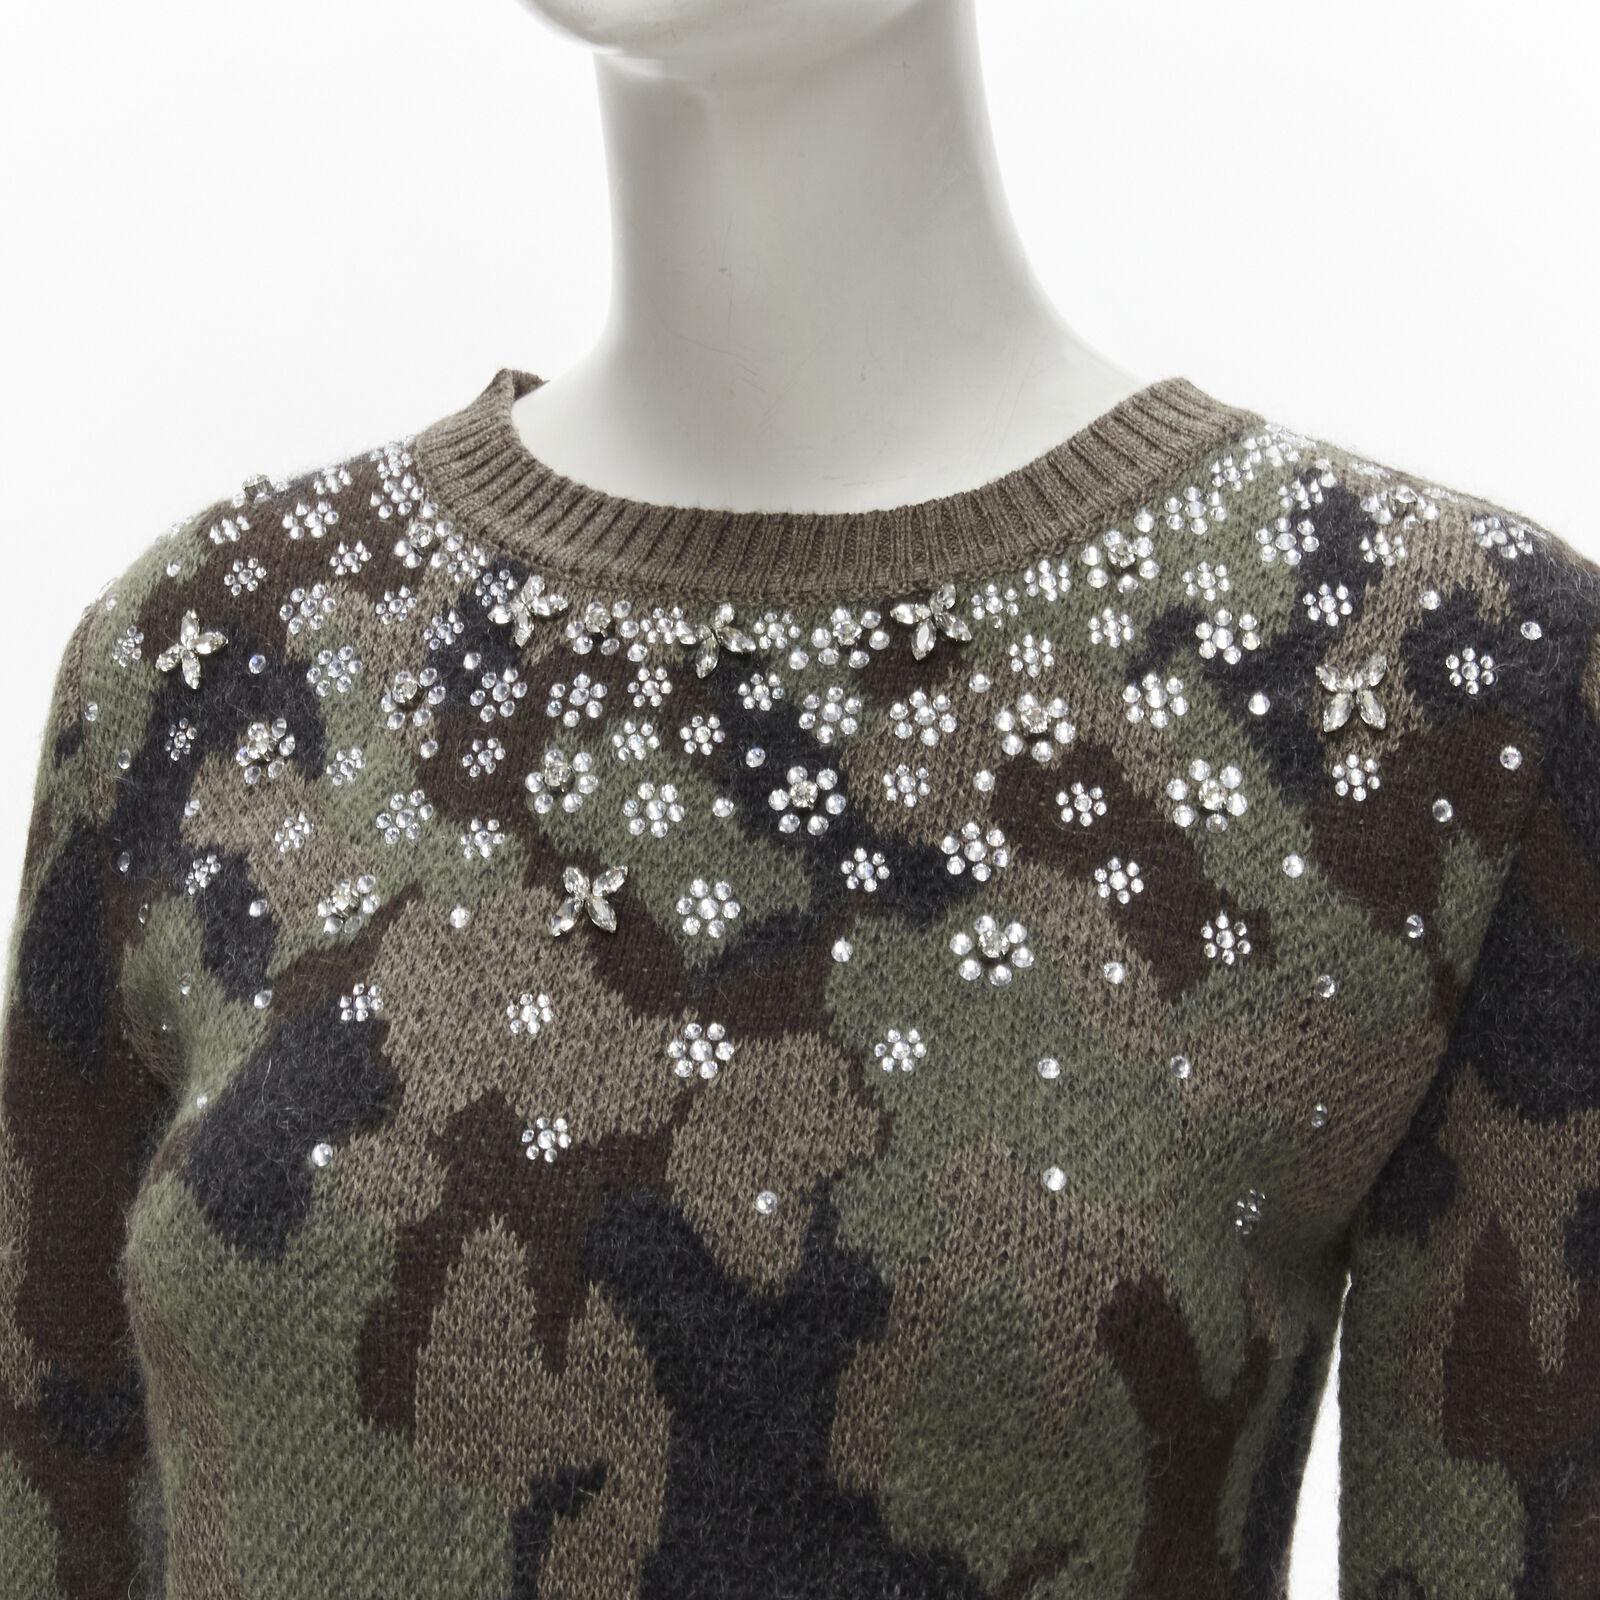 GIAMBATTISTA VALLI 2021 green camo crystal embellished cropped sweater IT38 XS
Reference: AAWC/A00240
Brand: Giambattista Valli
Designer: Giambattista Valli
Model: Fall Winter 2021
Collection: Fall Winter 2021
Material: Mohair, Wool
Color: Green,